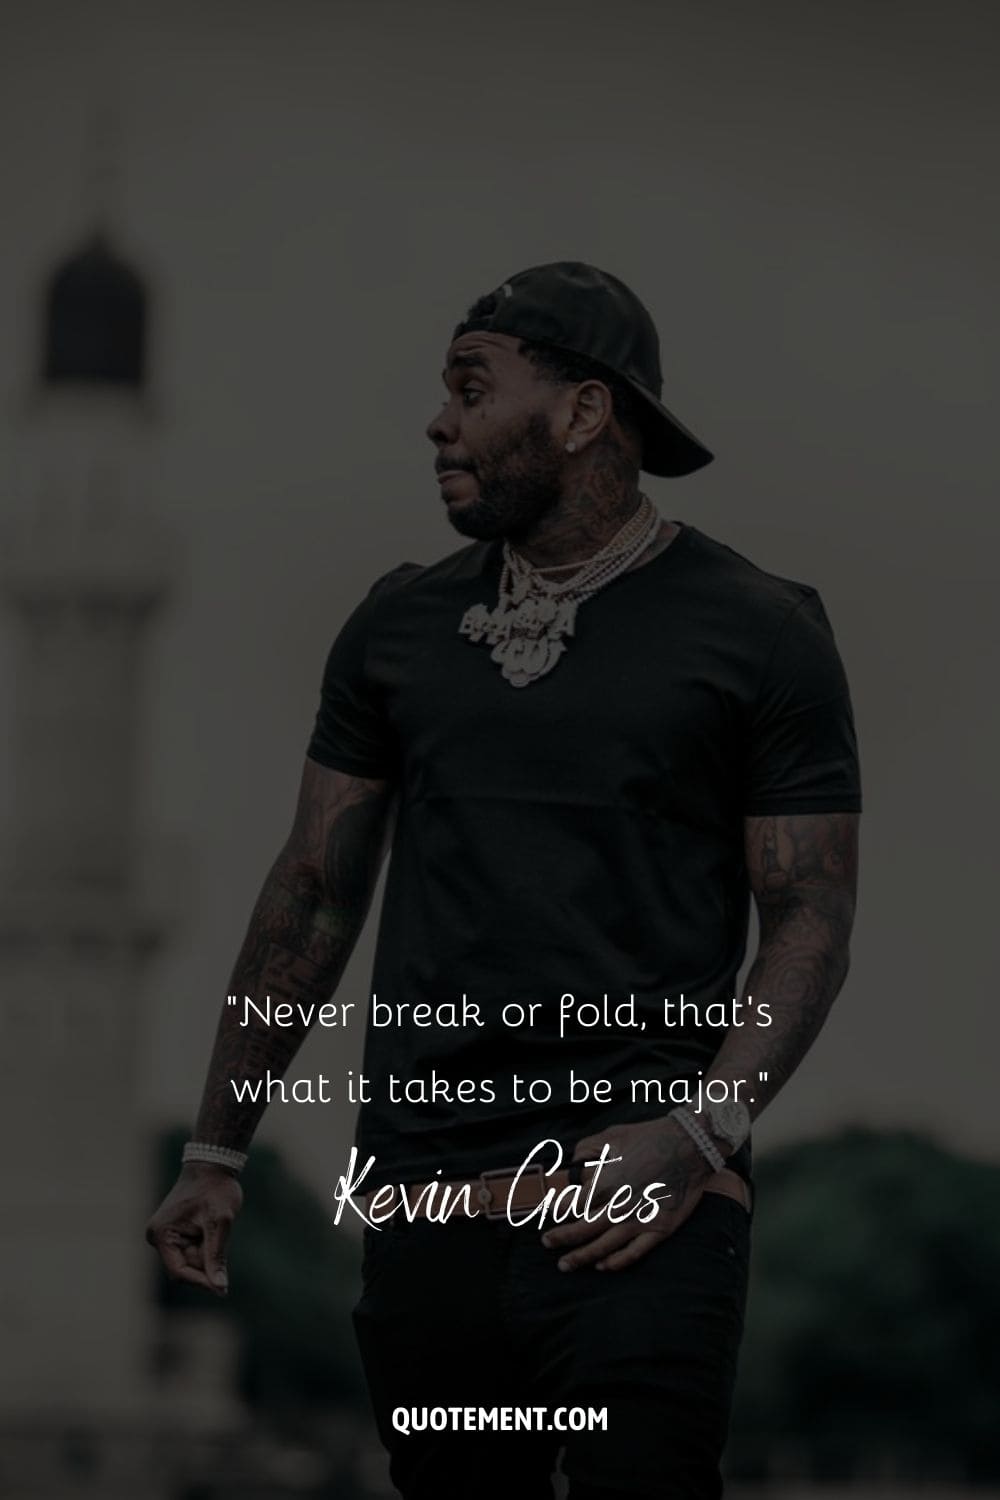 “Never break or fold, that’s what it takes to be major.” – Kevin Gates